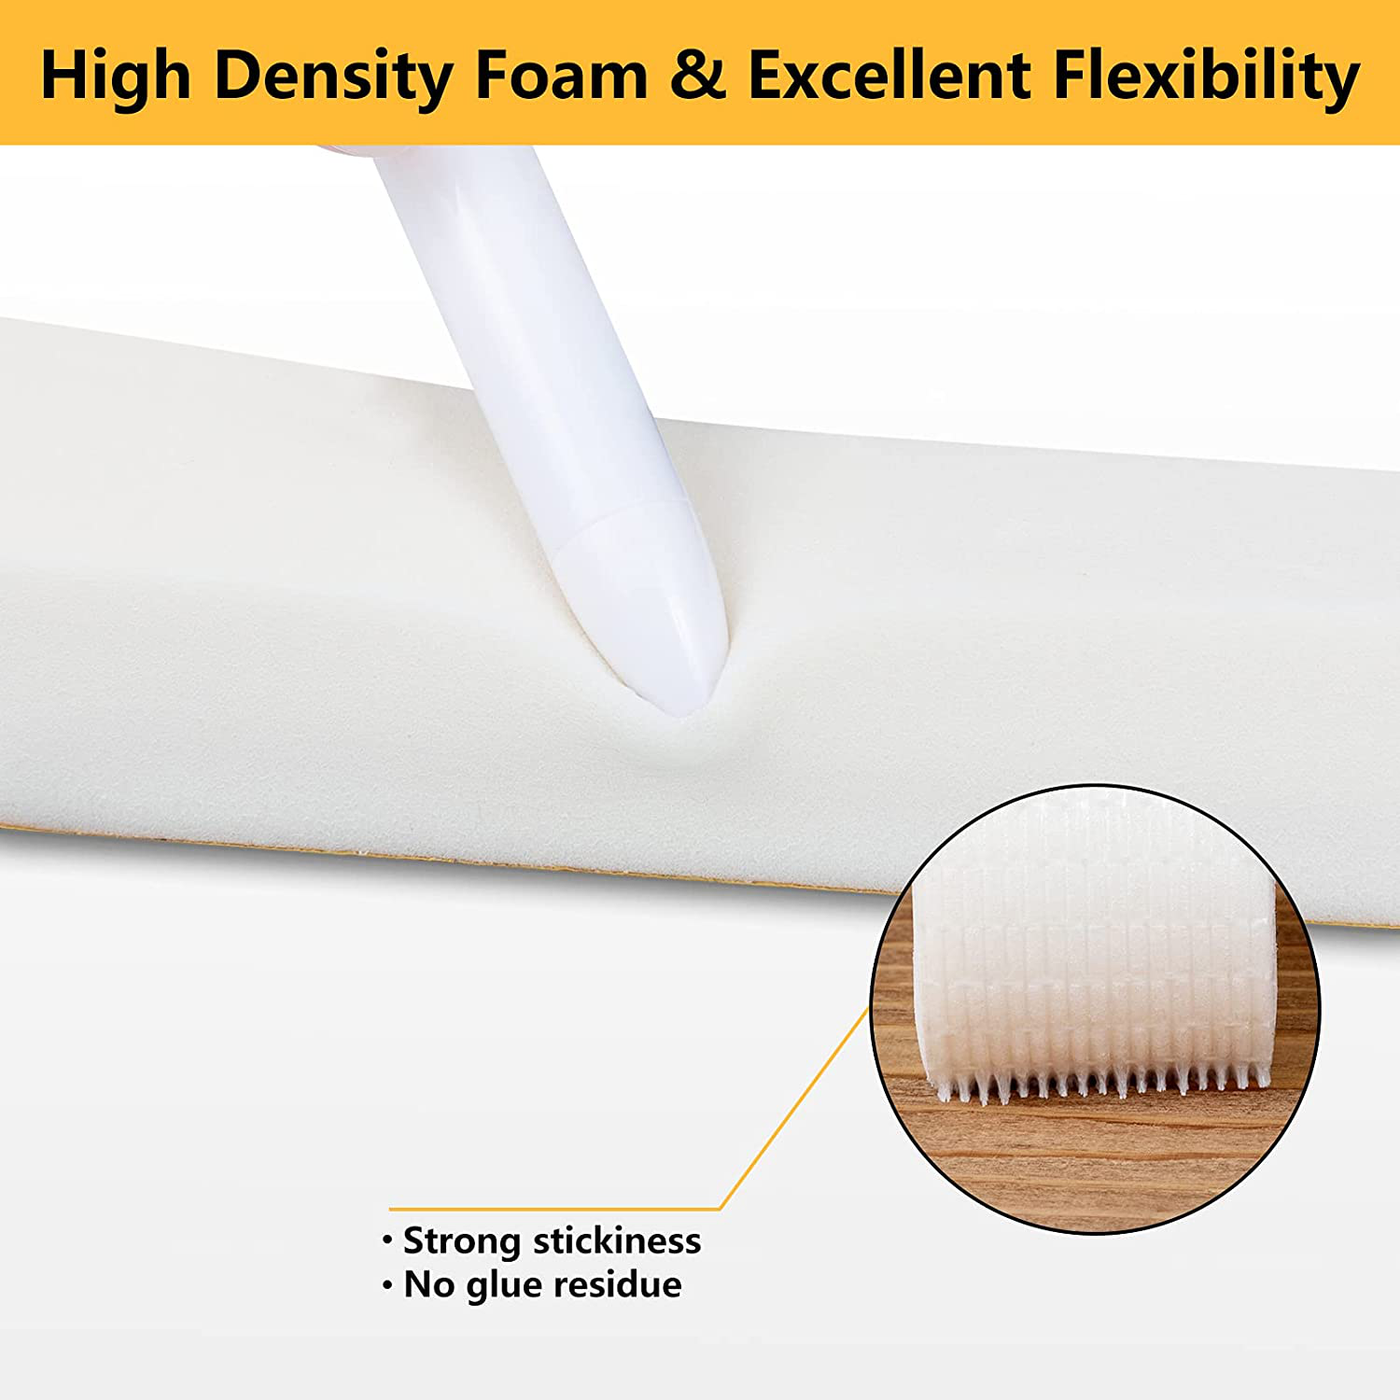 Weather Stripping Door Seal Strip with Self Adhesive Foam Tape Soundproof Door Draft Stopper for Doors Windows and Shower Glass Gaps